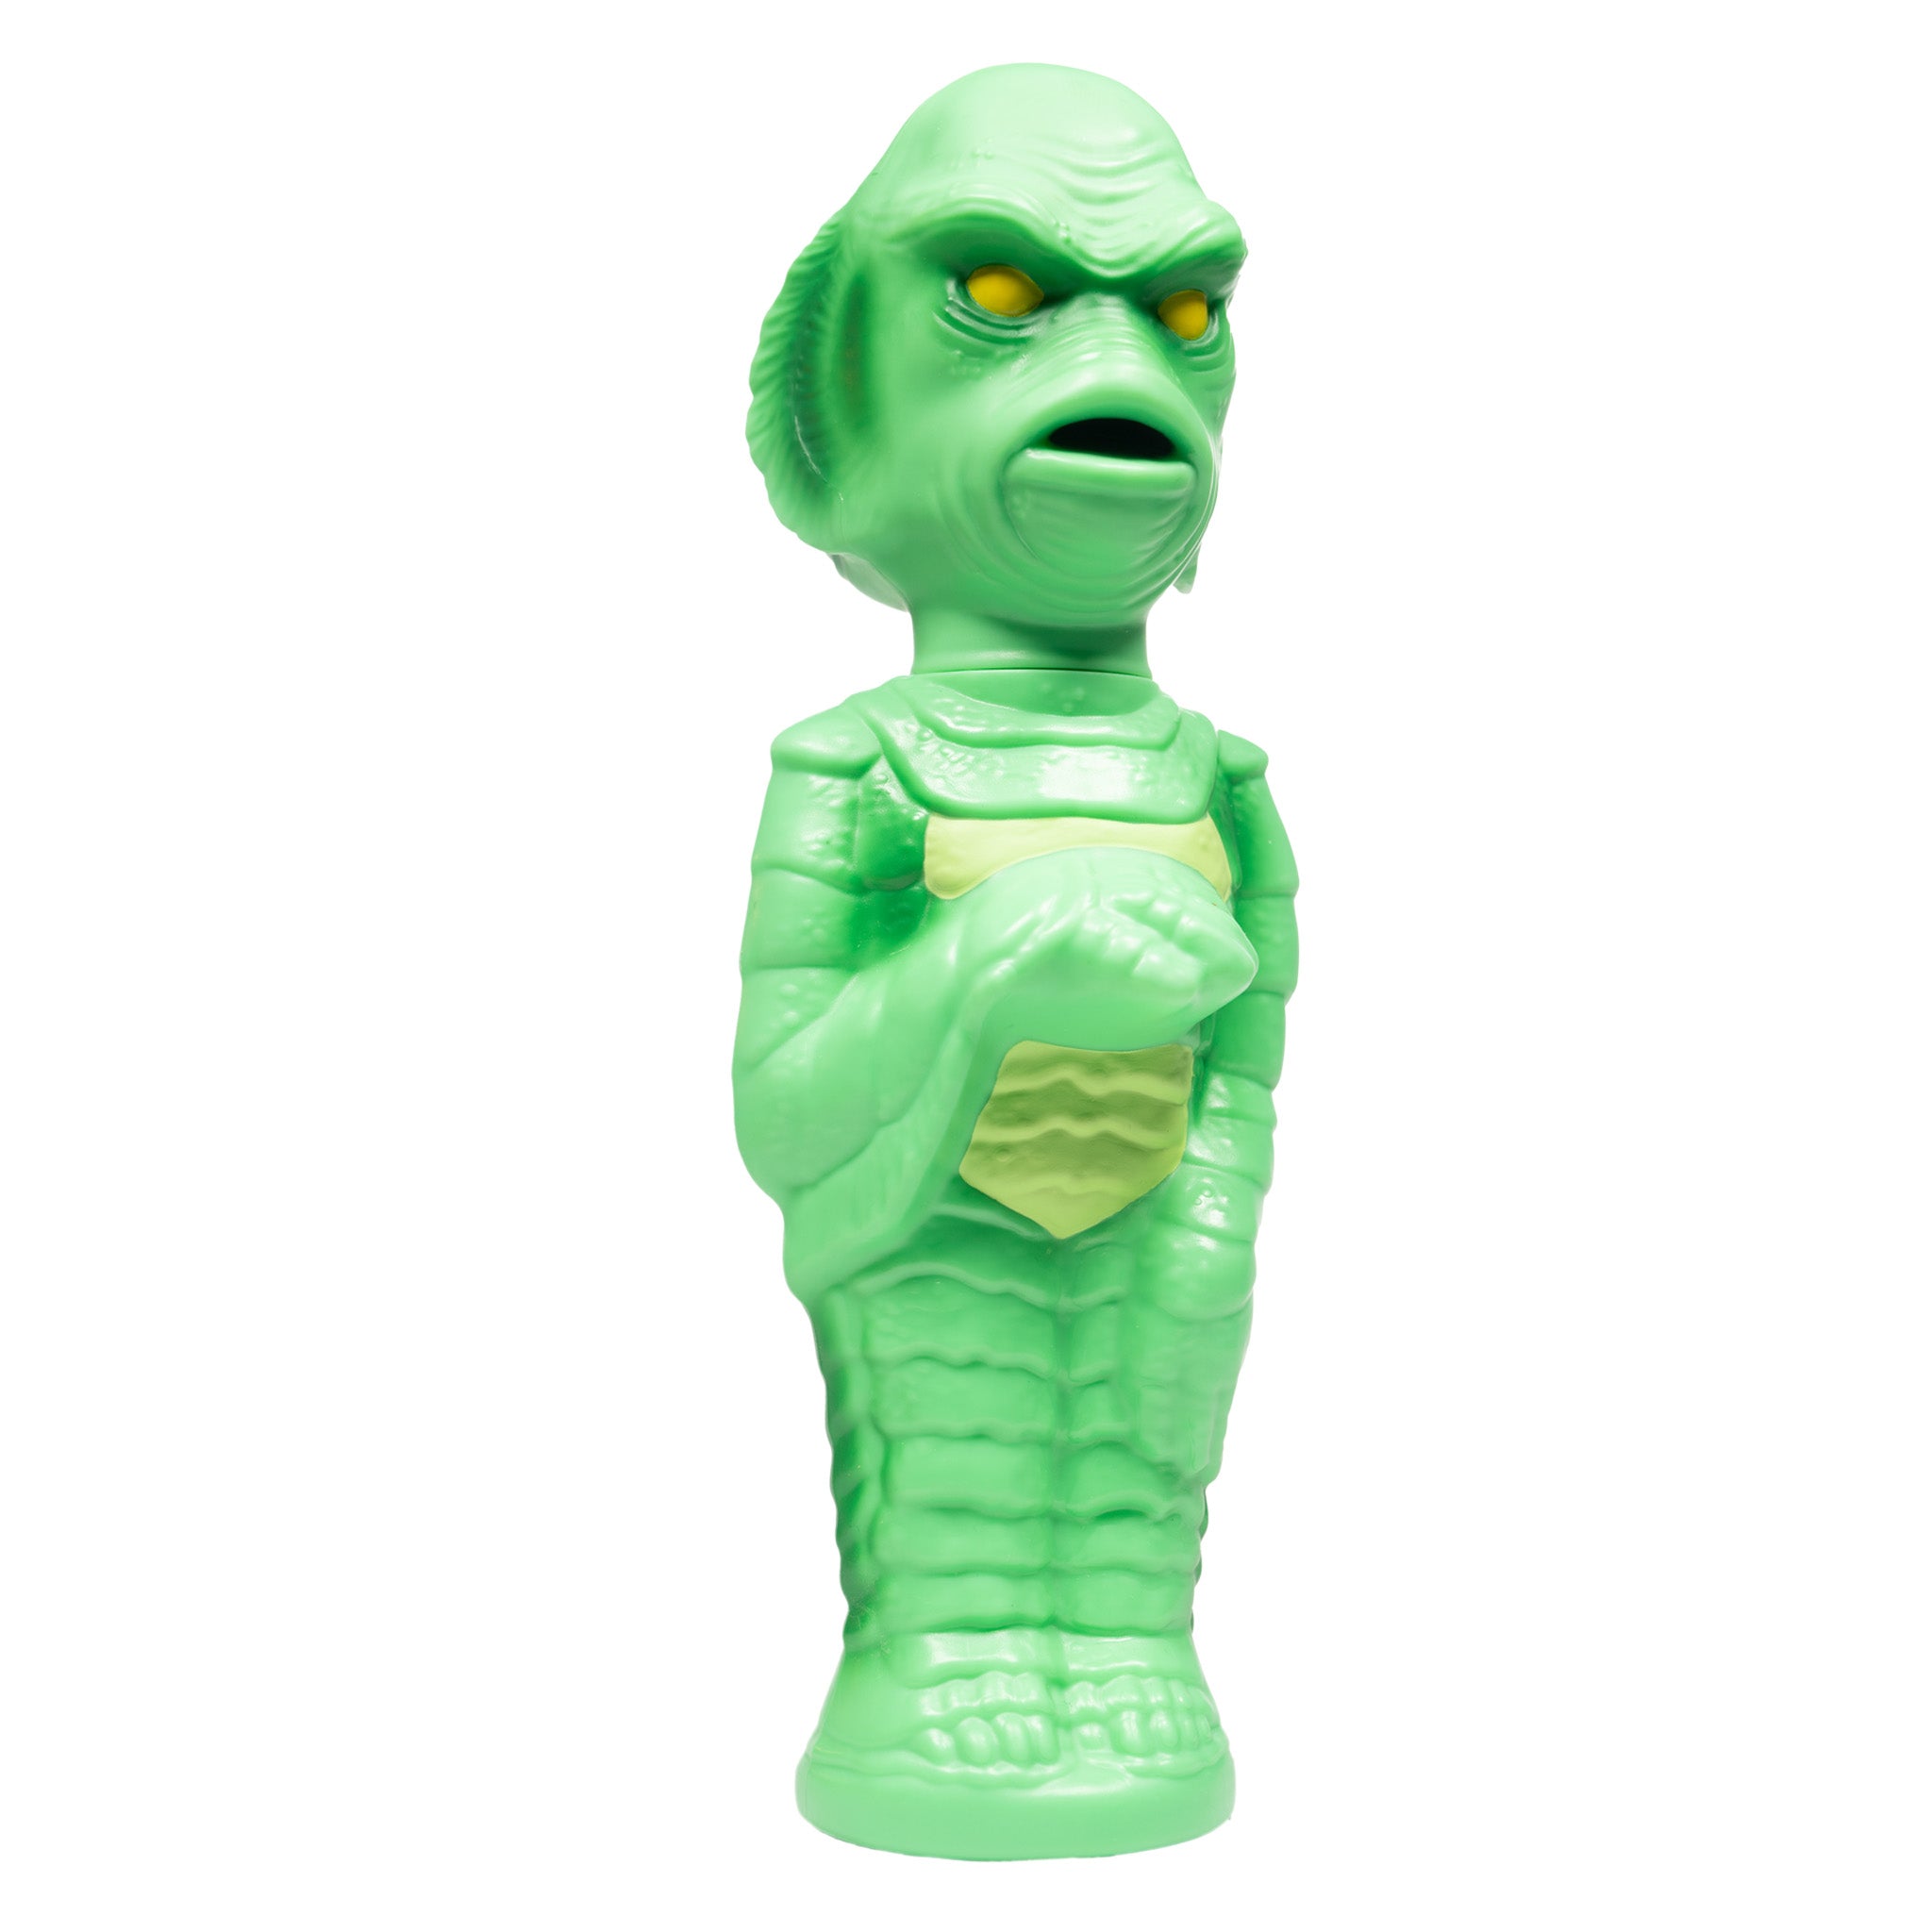 Universal Monsters Super Soapies - Creature from the Black Lagoon